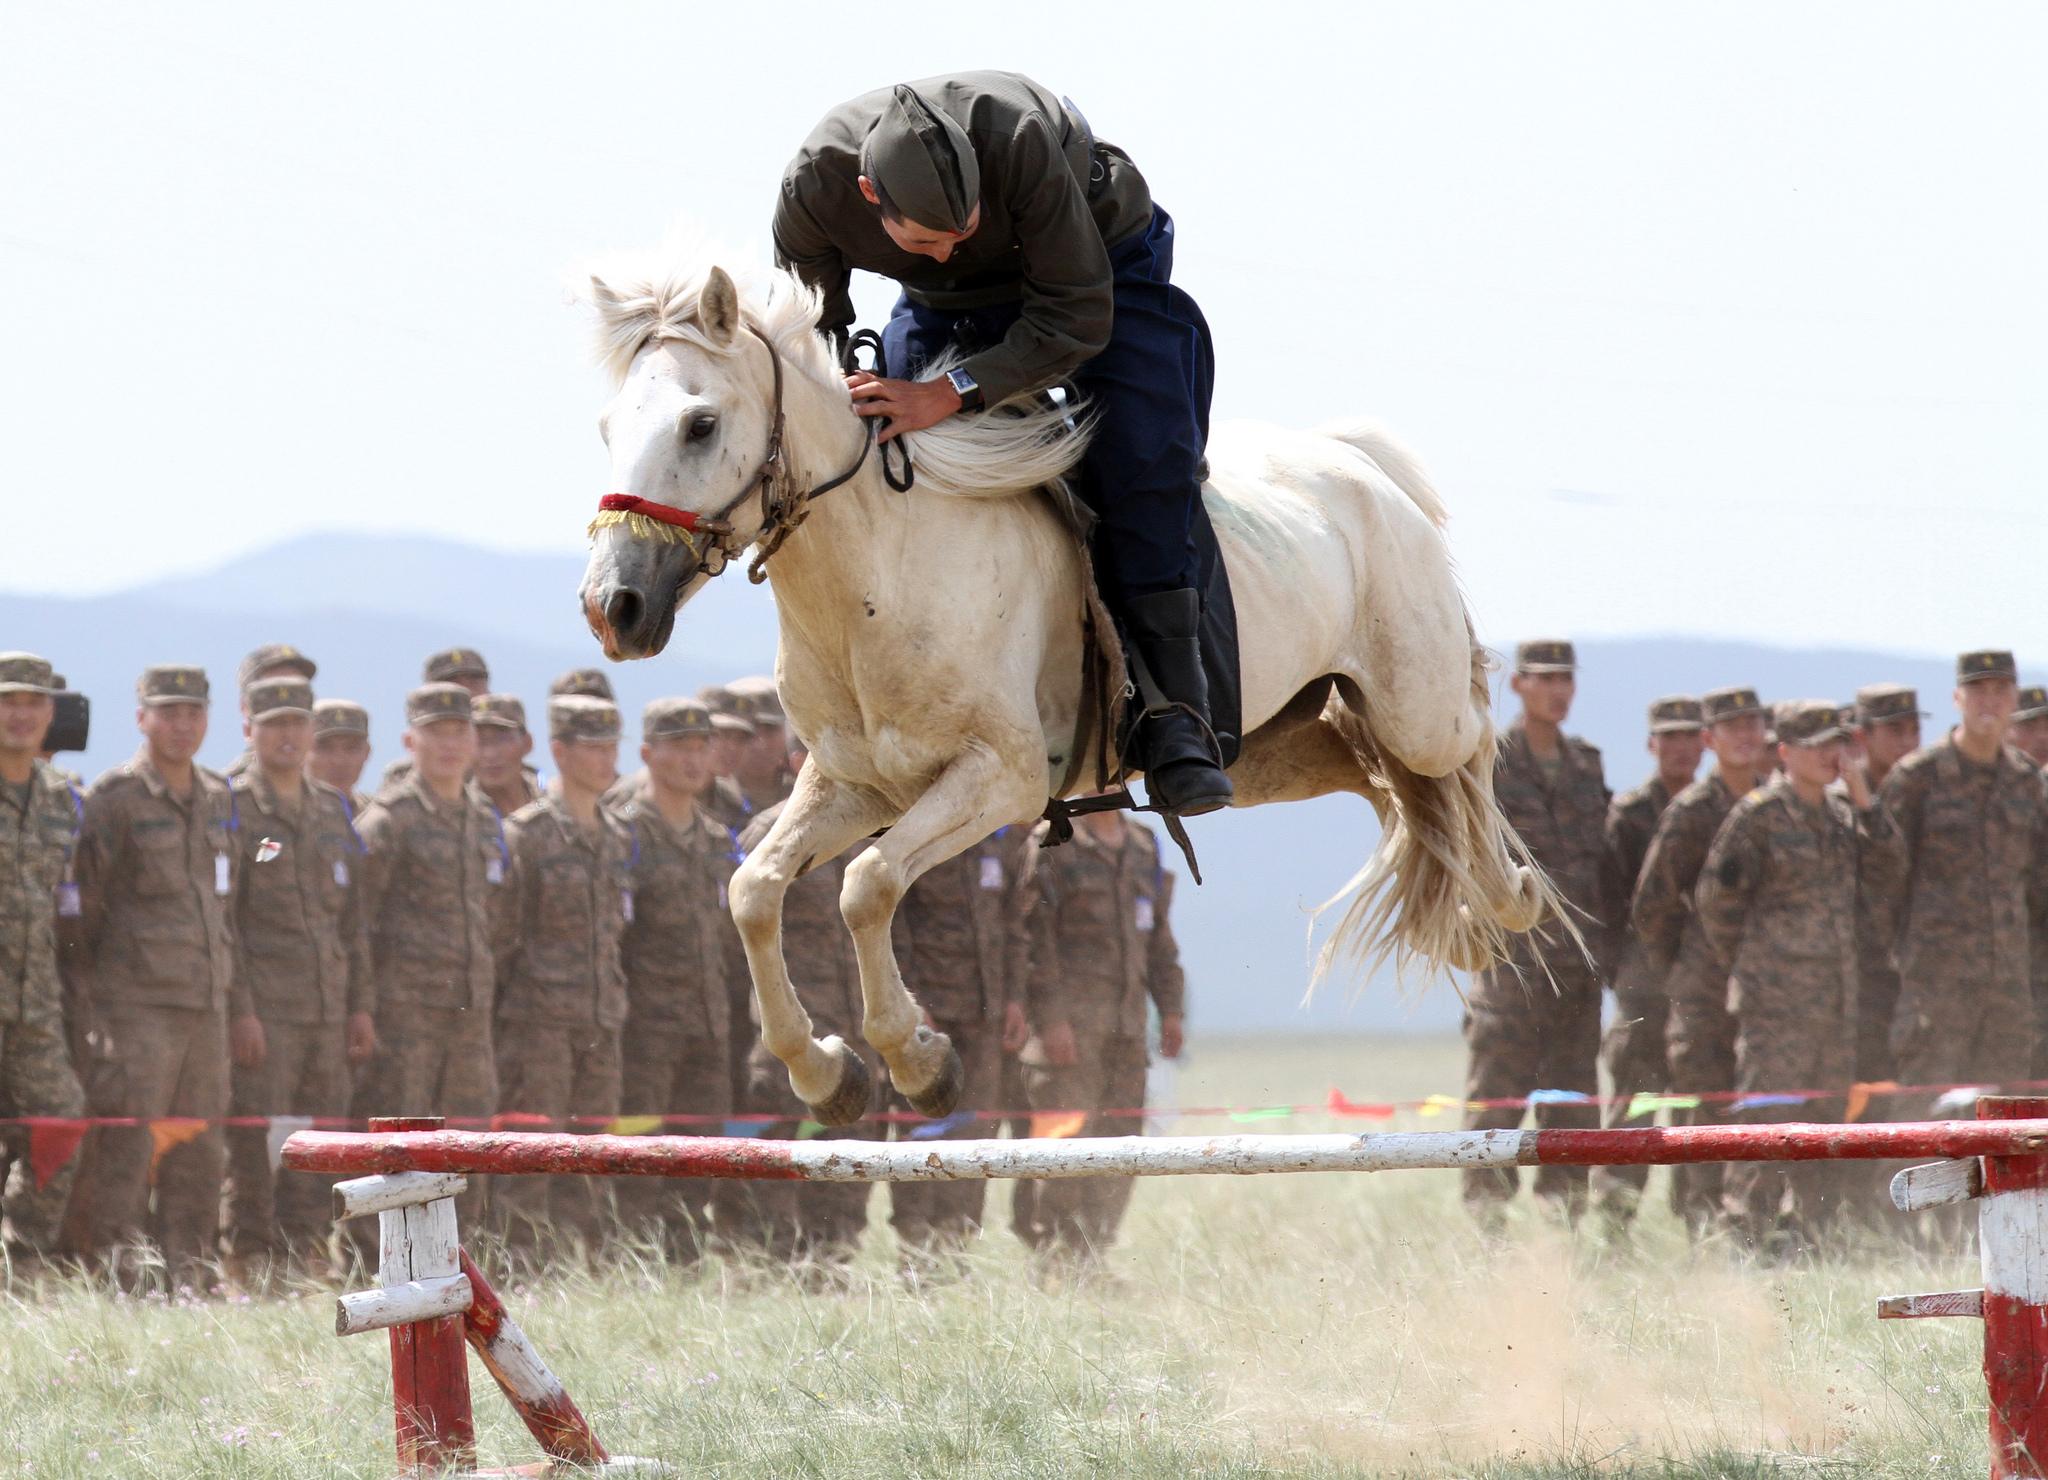 A Member of the Mongolian Armed Forces 234 Cavalry Unit, jumps his horse during the opening ceremony of Exercise Khaan Quest in Five Hills Training Area, Mongolia. Flickr - DVIDSHUB